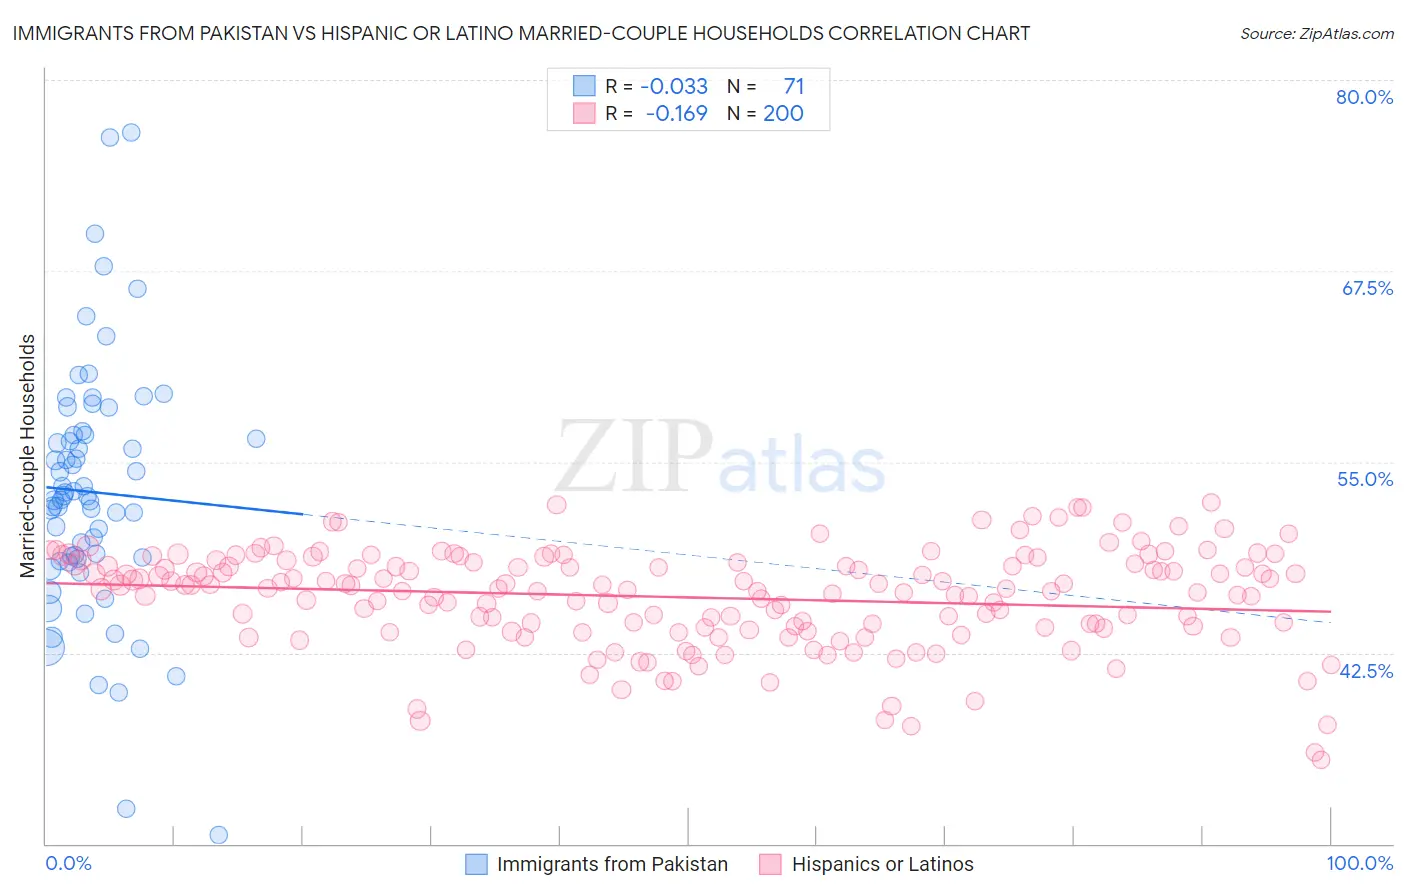 Immigrants from Pakistan vs Hispanic or Latino Married-couple Households